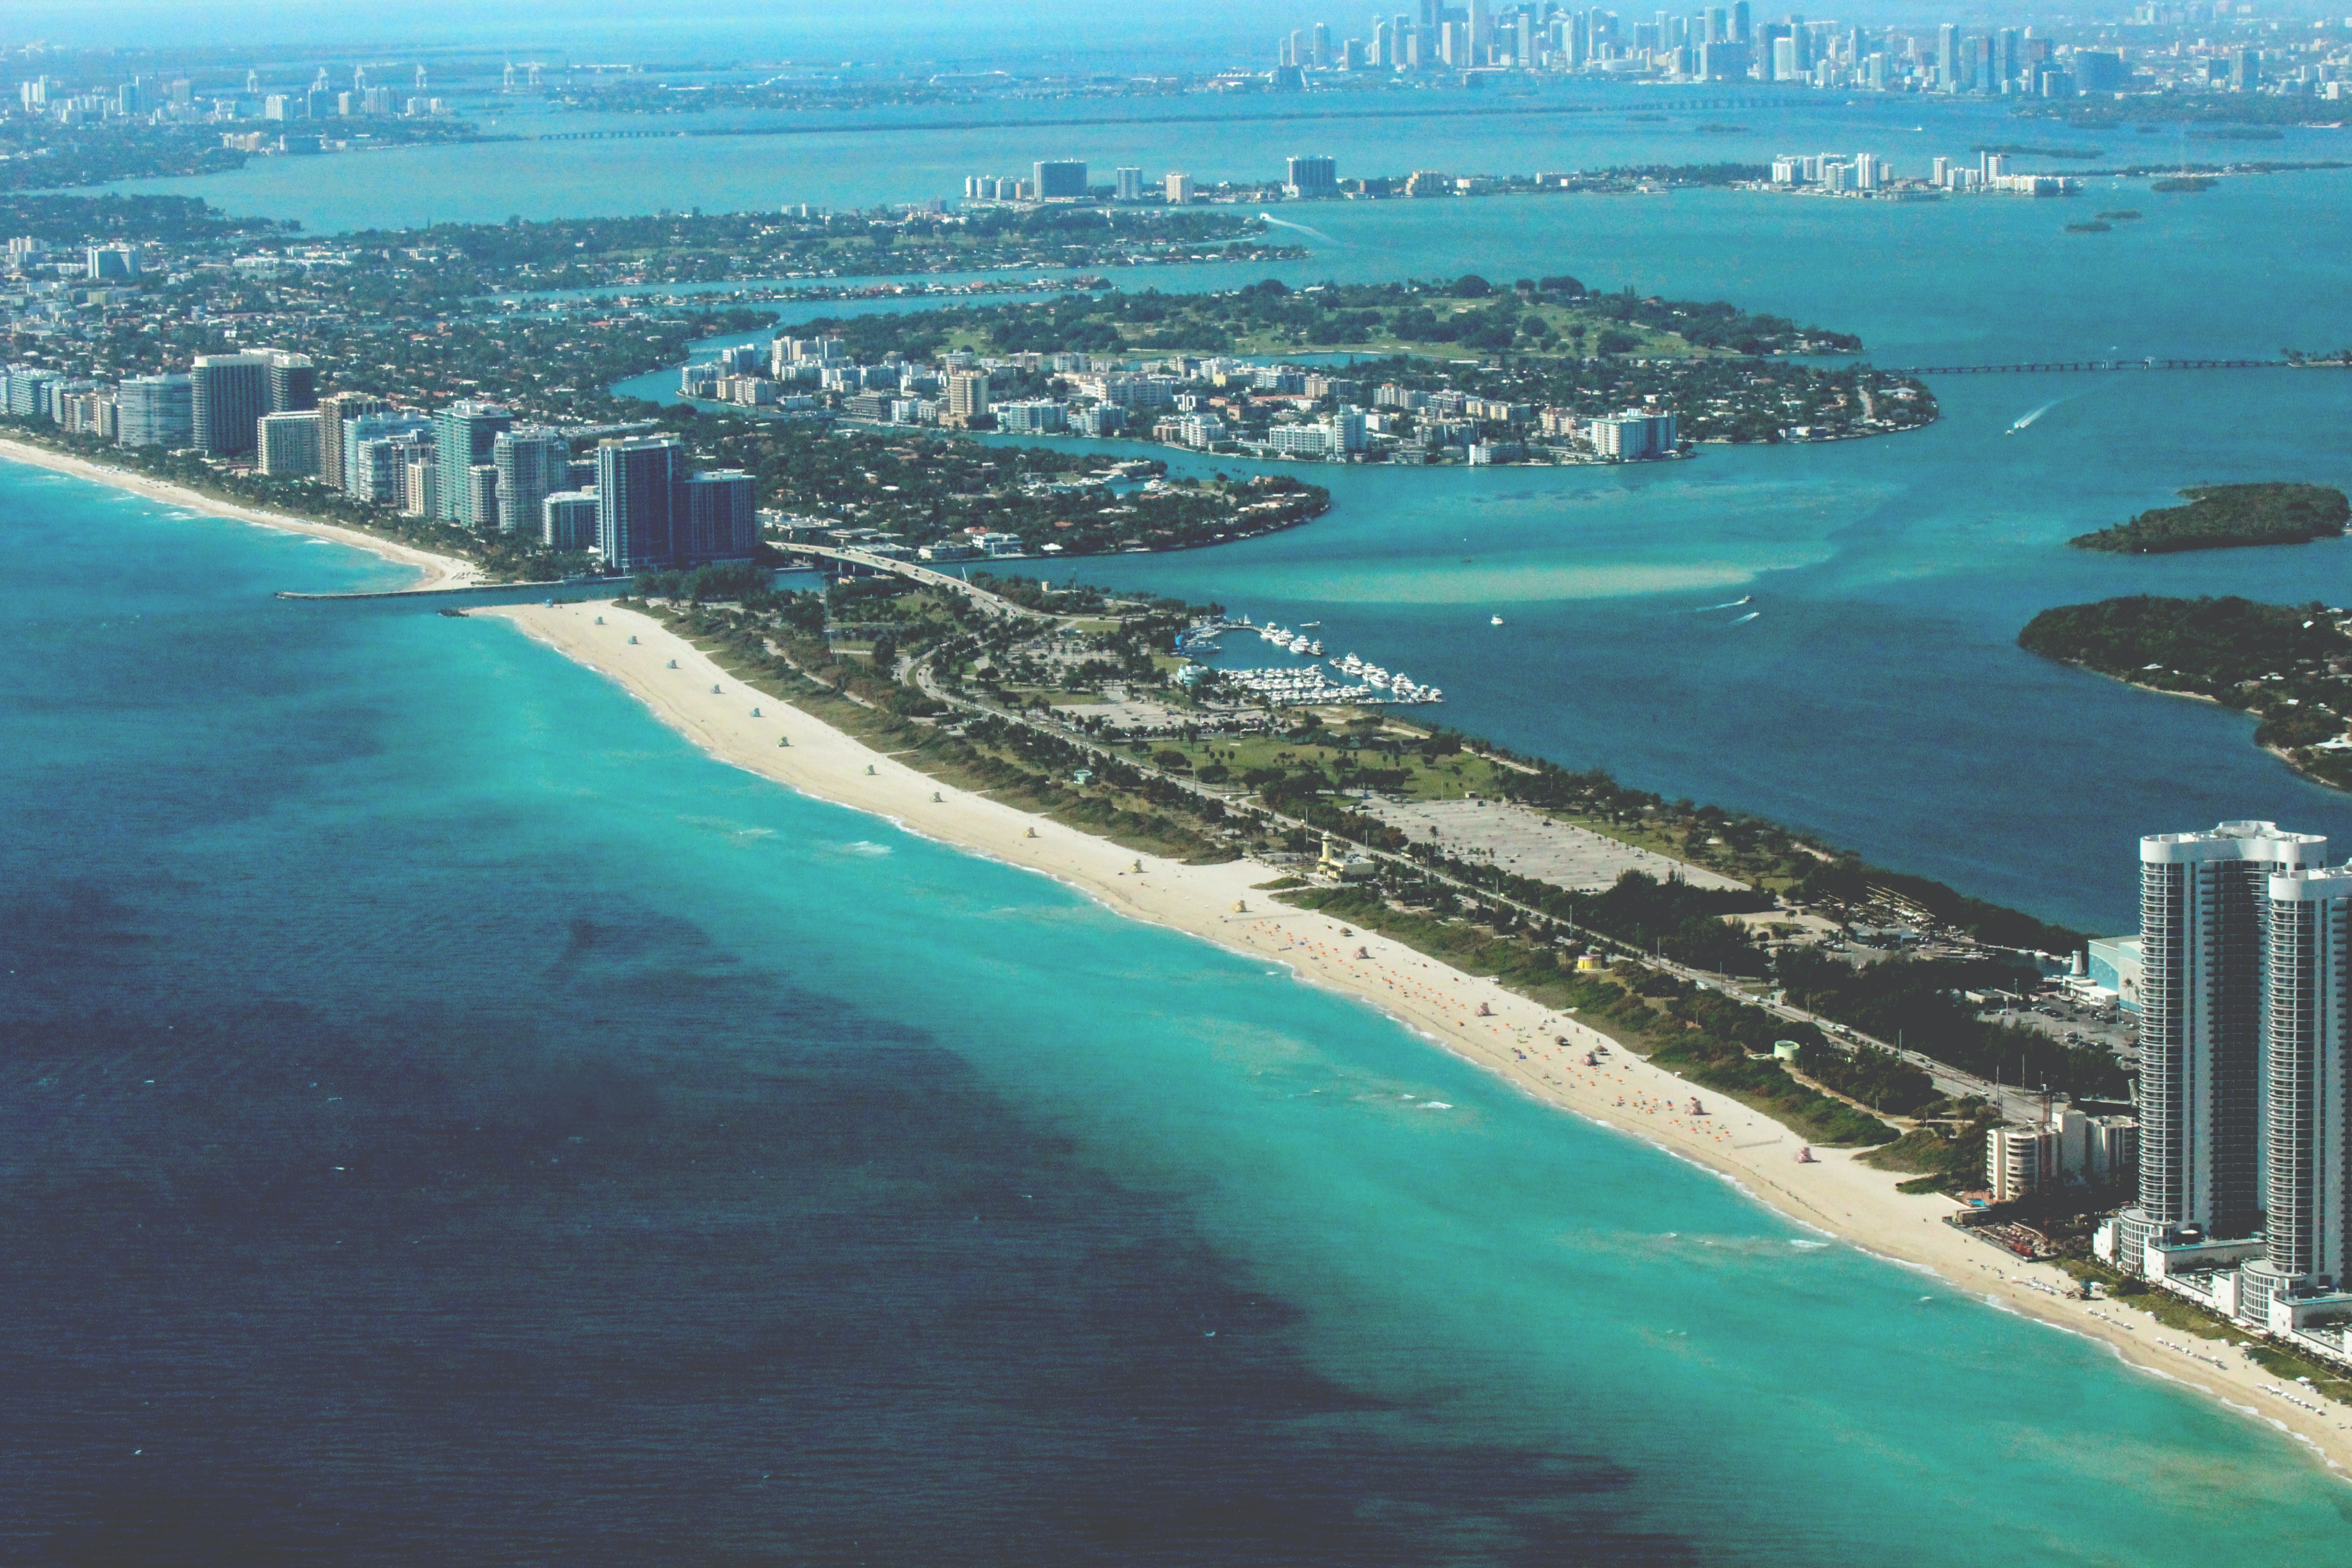 narrow strip of the city of miami surrounded by water